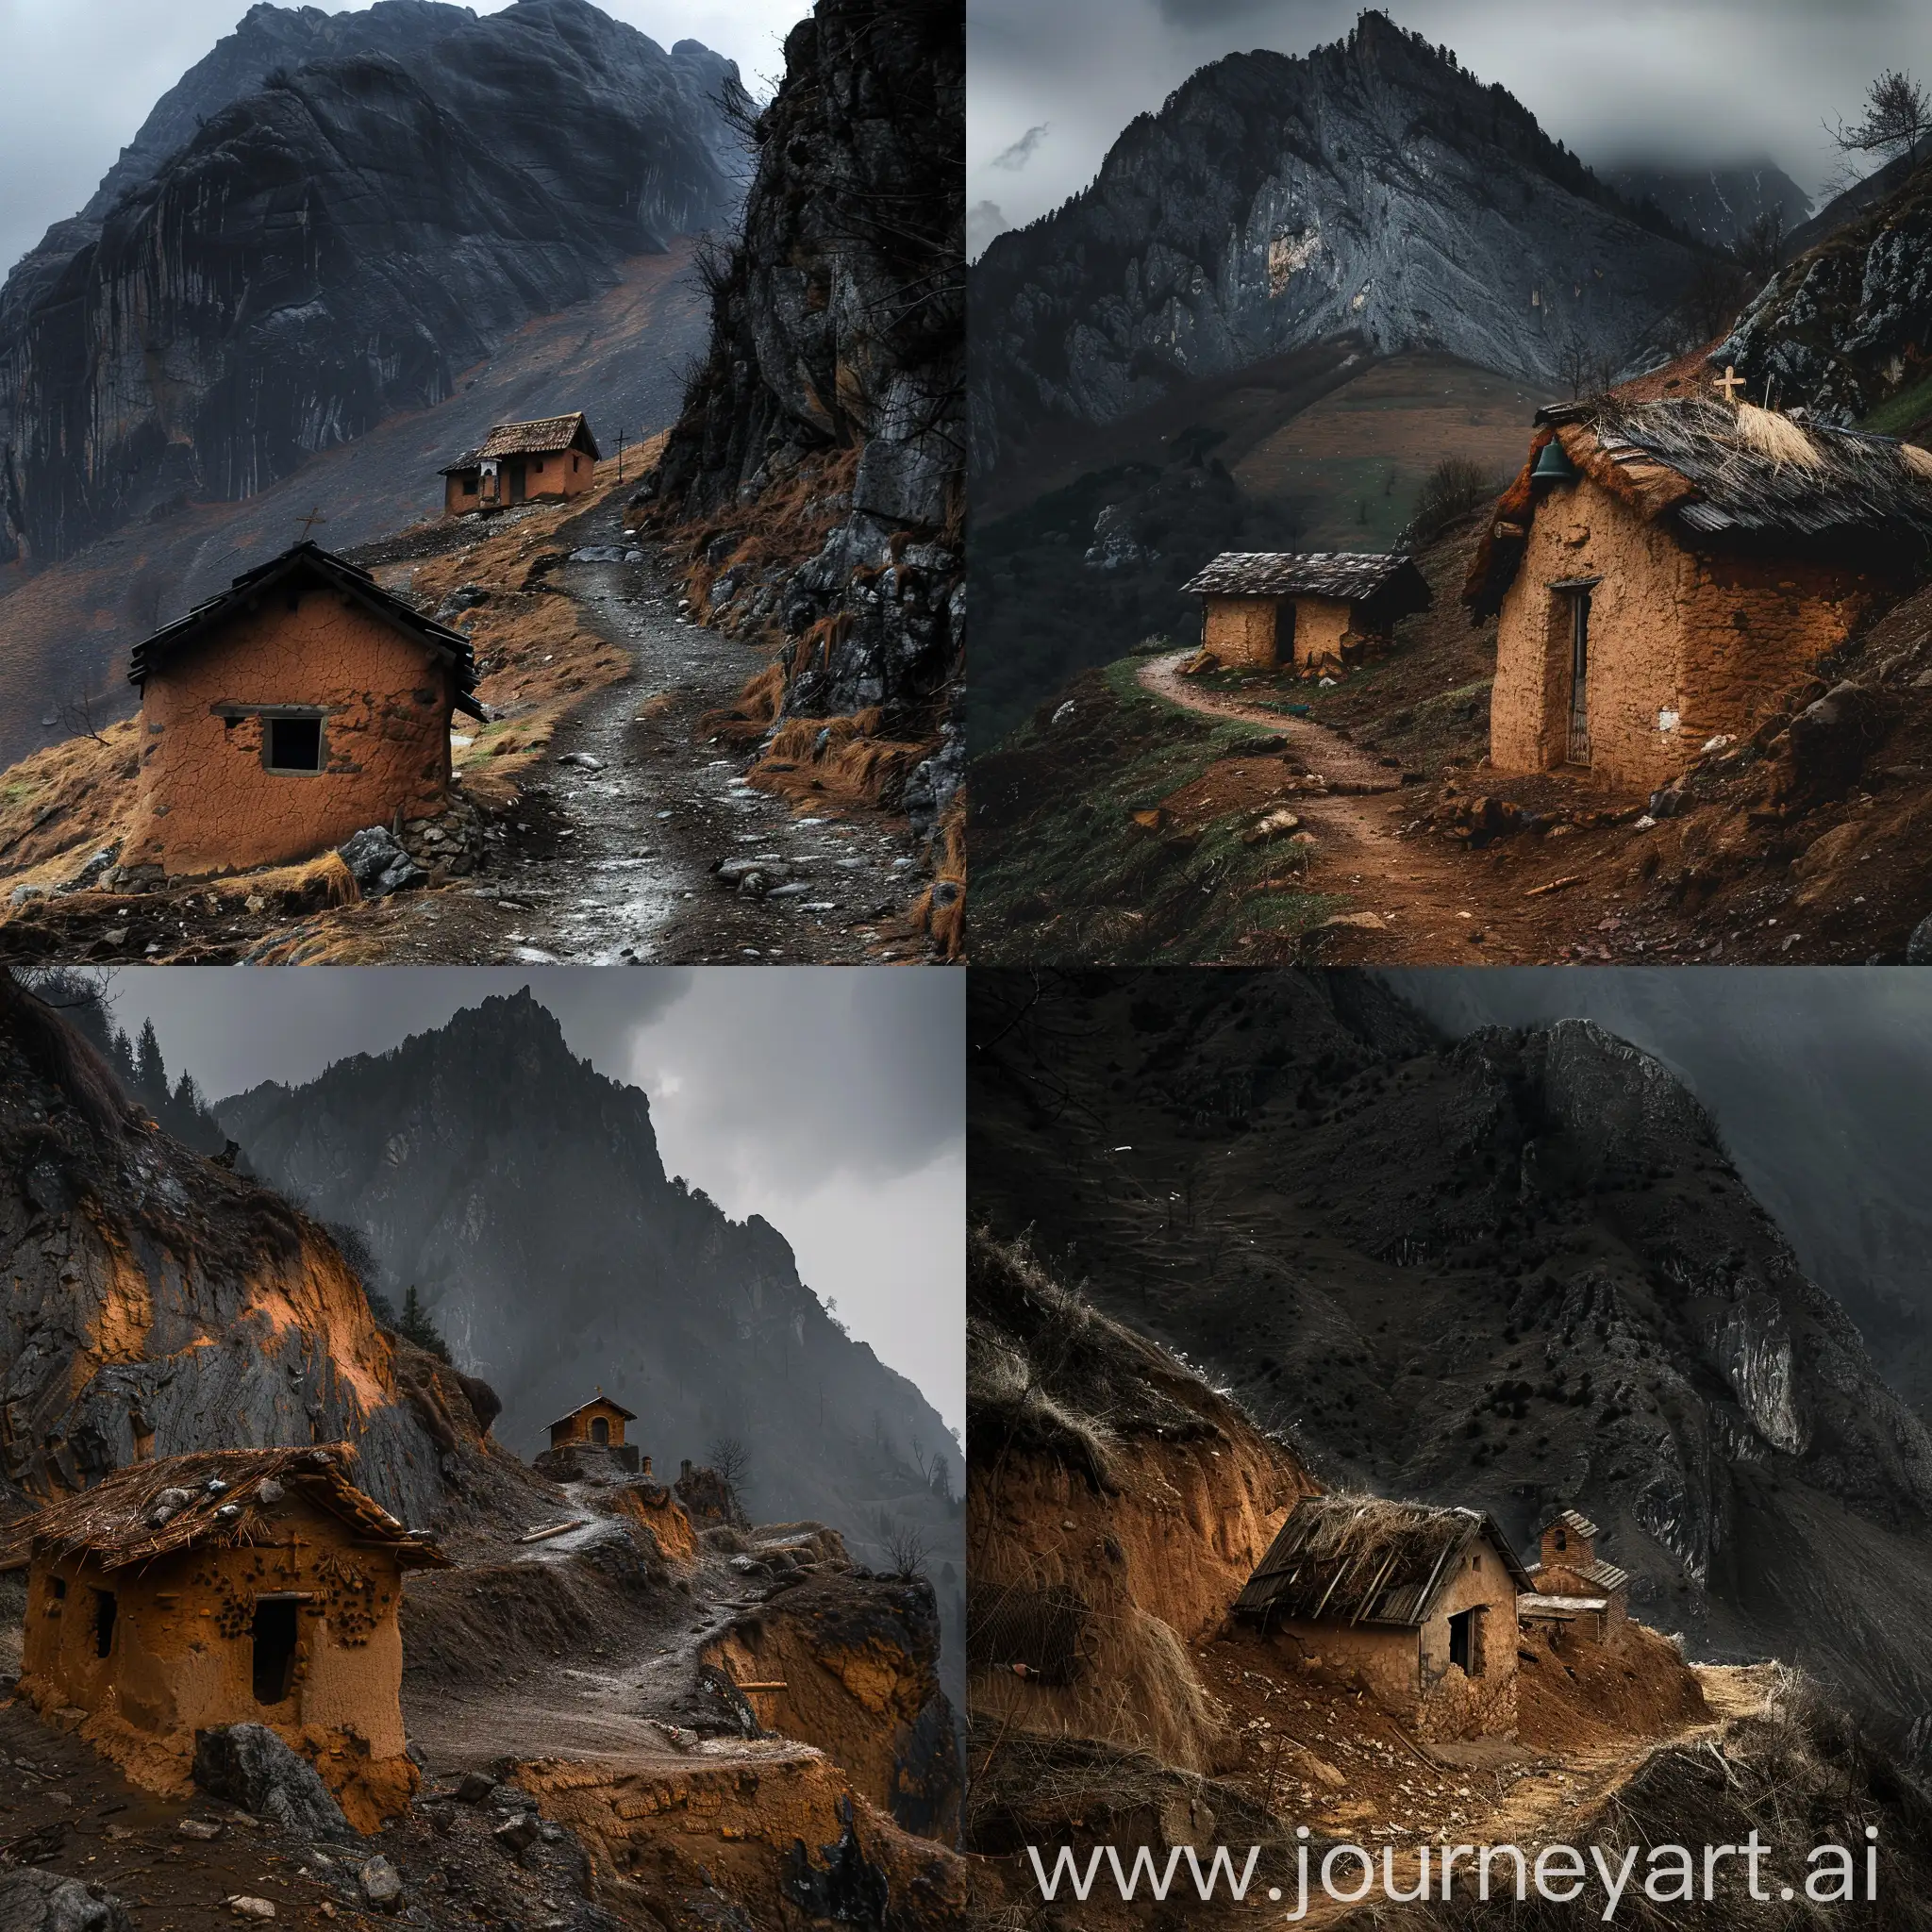 Rustic-Romanian-Mountain-Hut-and-Chapel-Amidst-Dark-Mountains